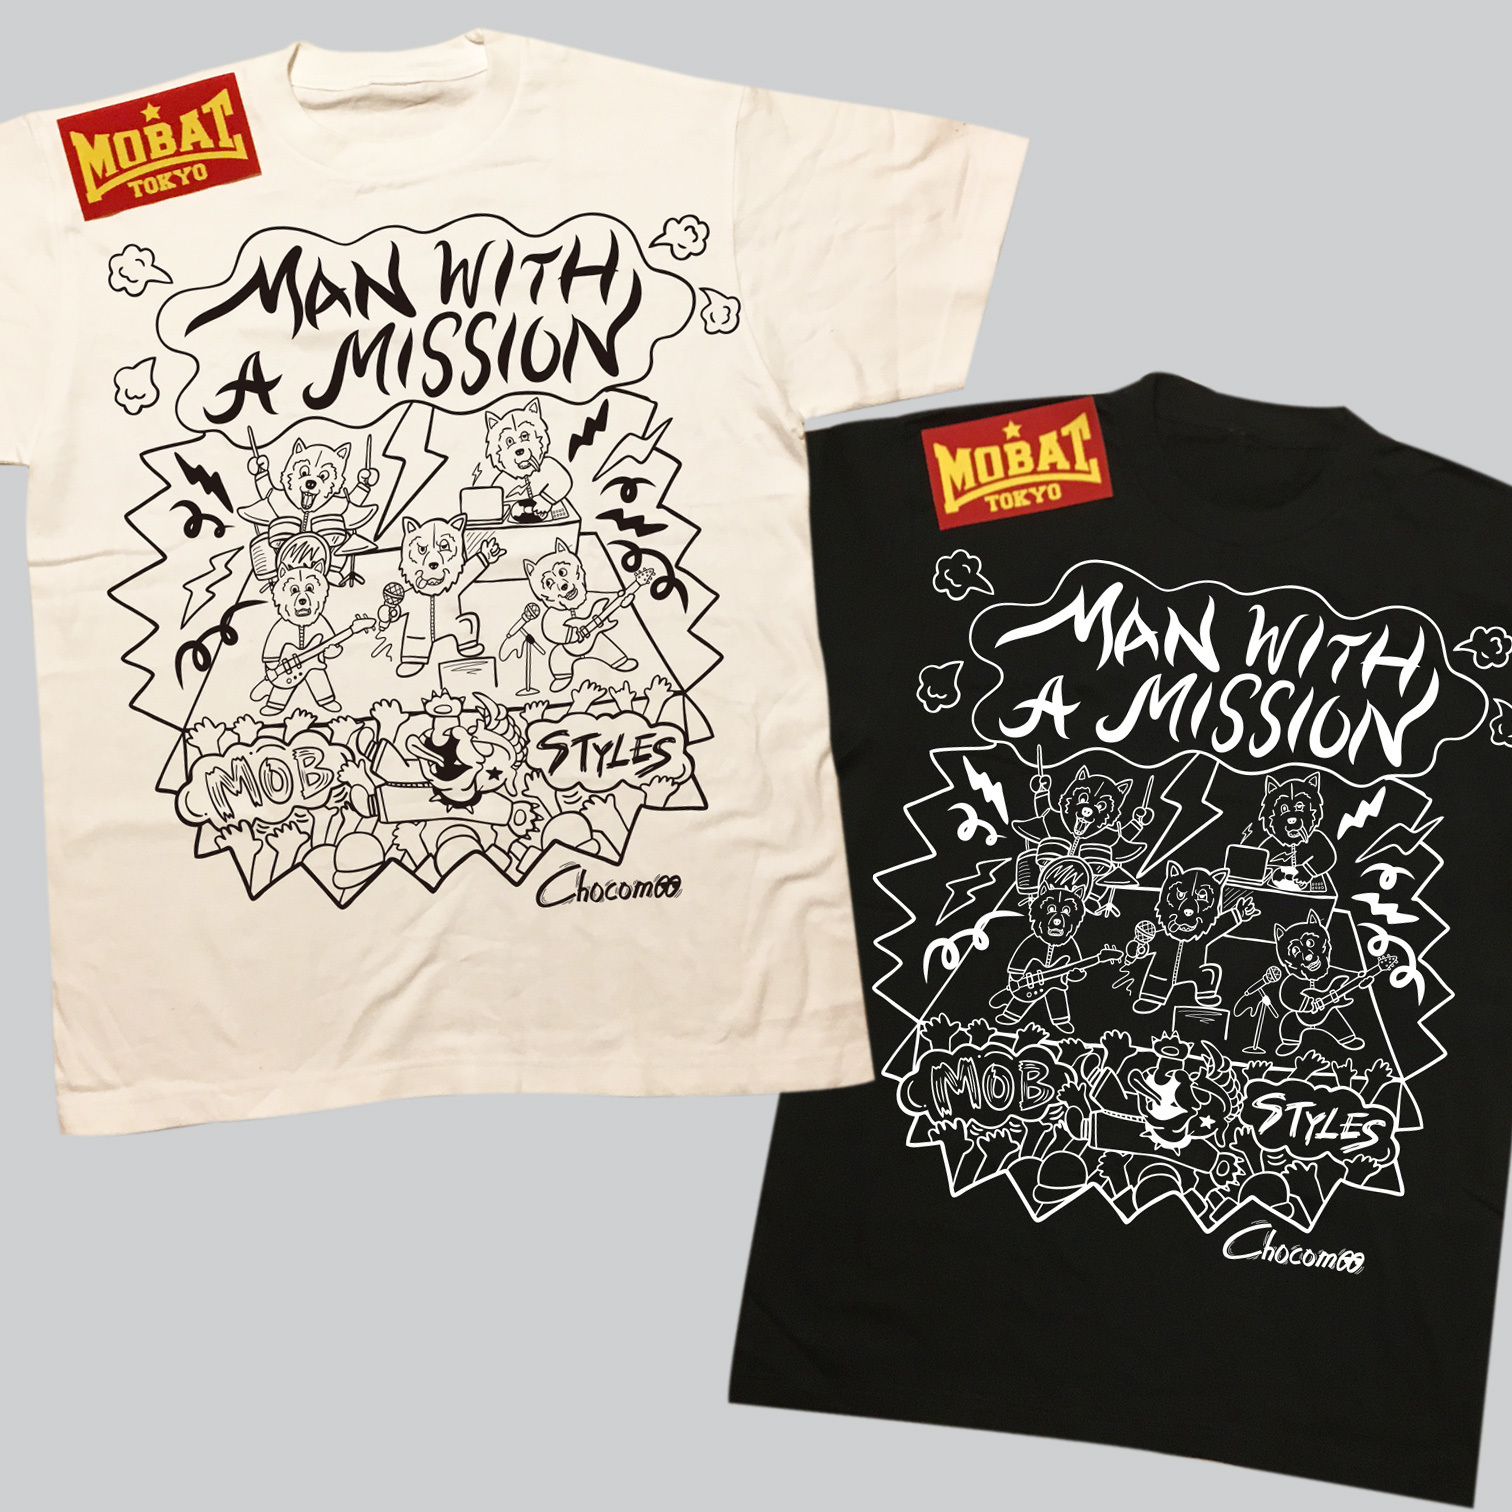 MAN WITH A MISSON x MOBSTYLESコラボTシャツ第三弾！ | MAN WITH A MISSION